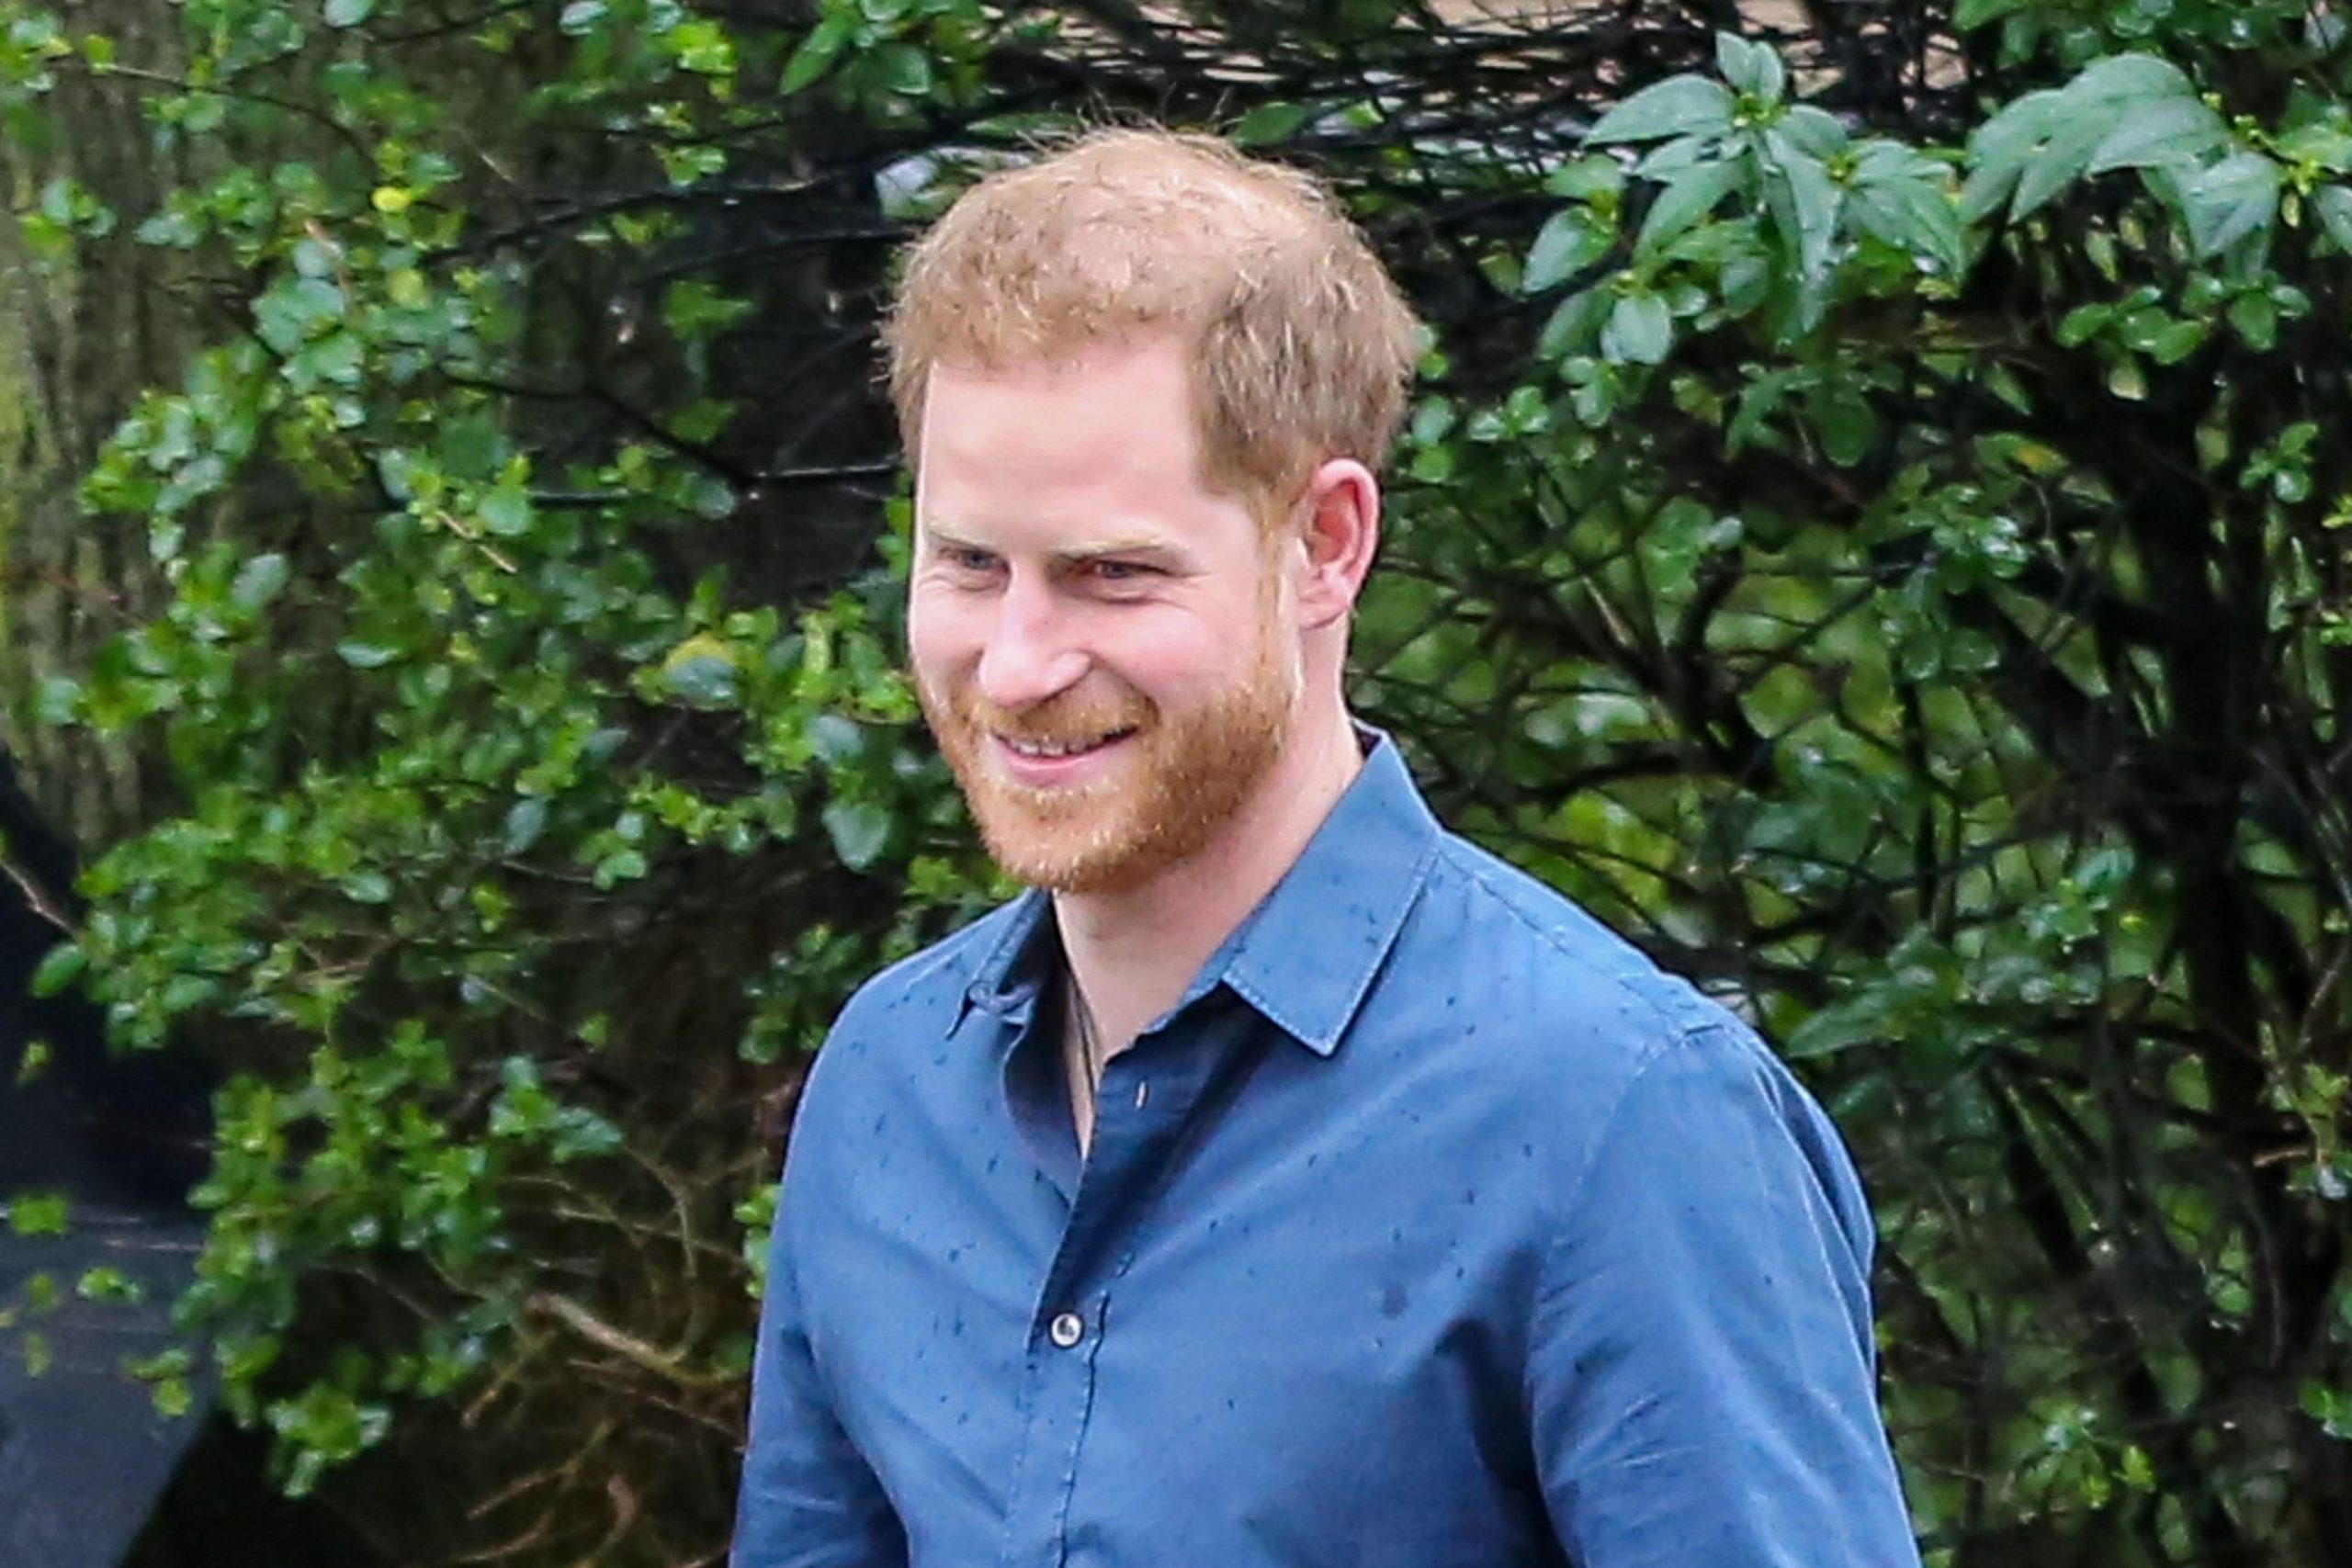 The Duke of Sussex